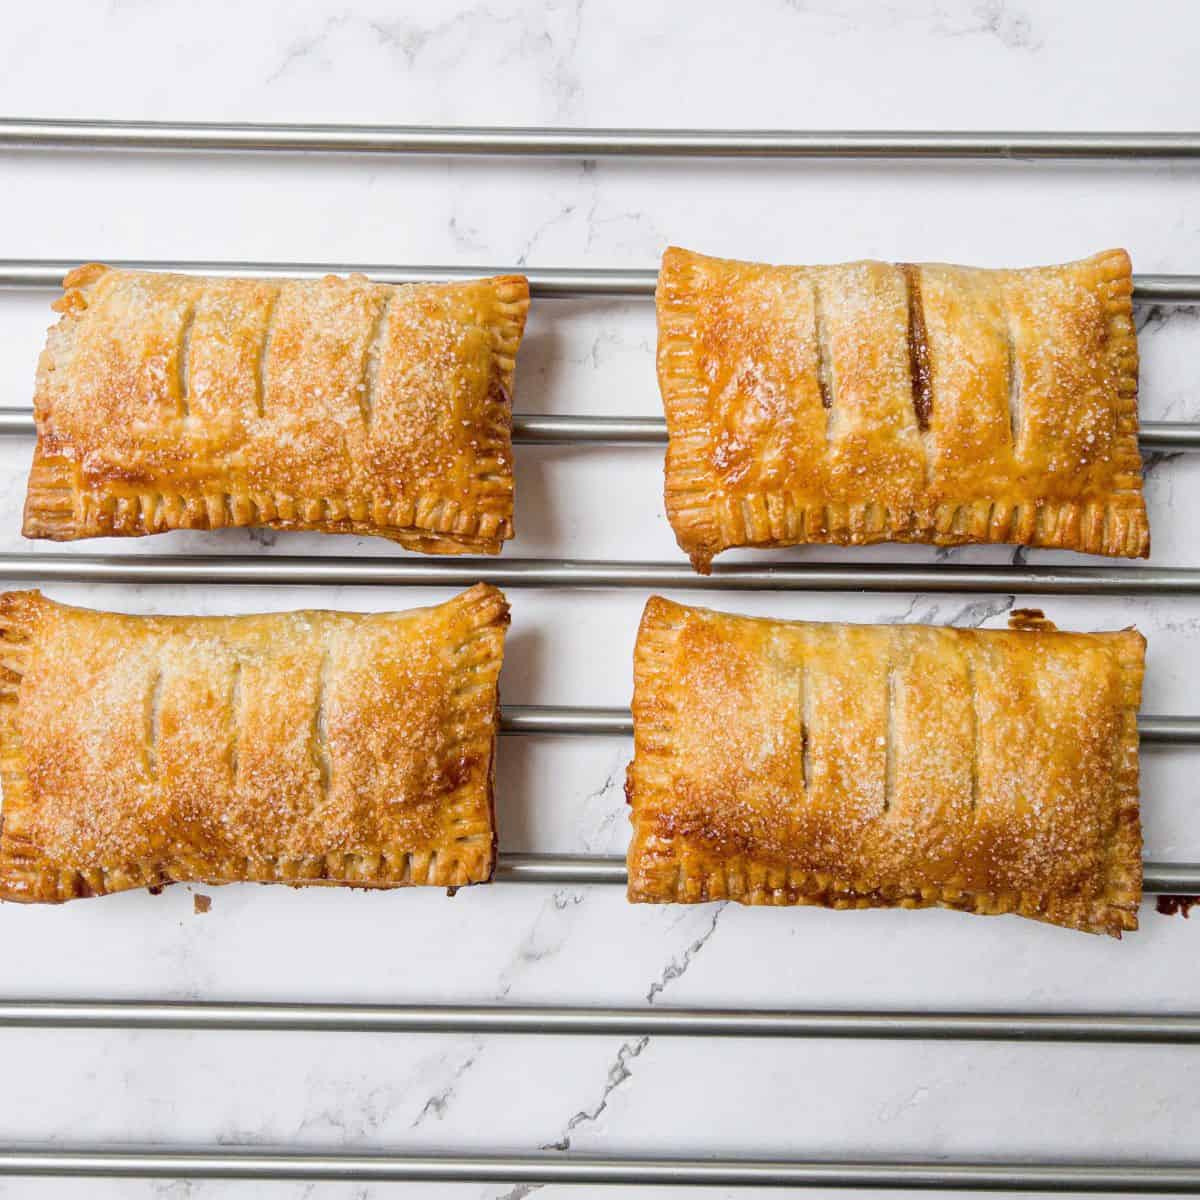 https://thescattymum.com/wp-content/uploads/2023/03/gluten-free-apple-turnovers-cooling.jpg